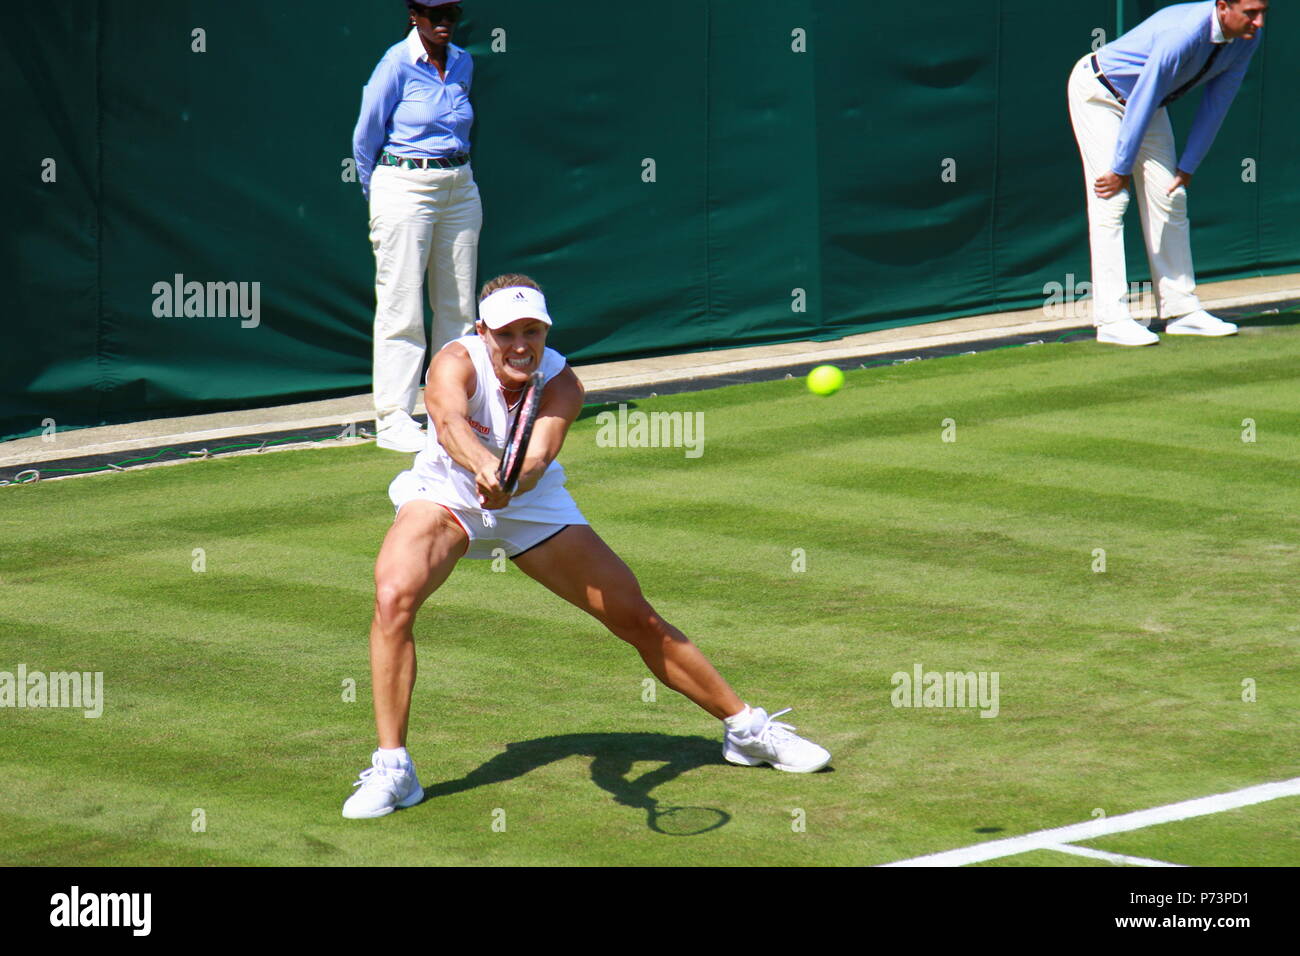 Angelique Kerber playing in the fist round at Wimbledon Tennis Championships 2018. Wimbledon champion 2018. Russell Moore portfolio page. Stock Photo